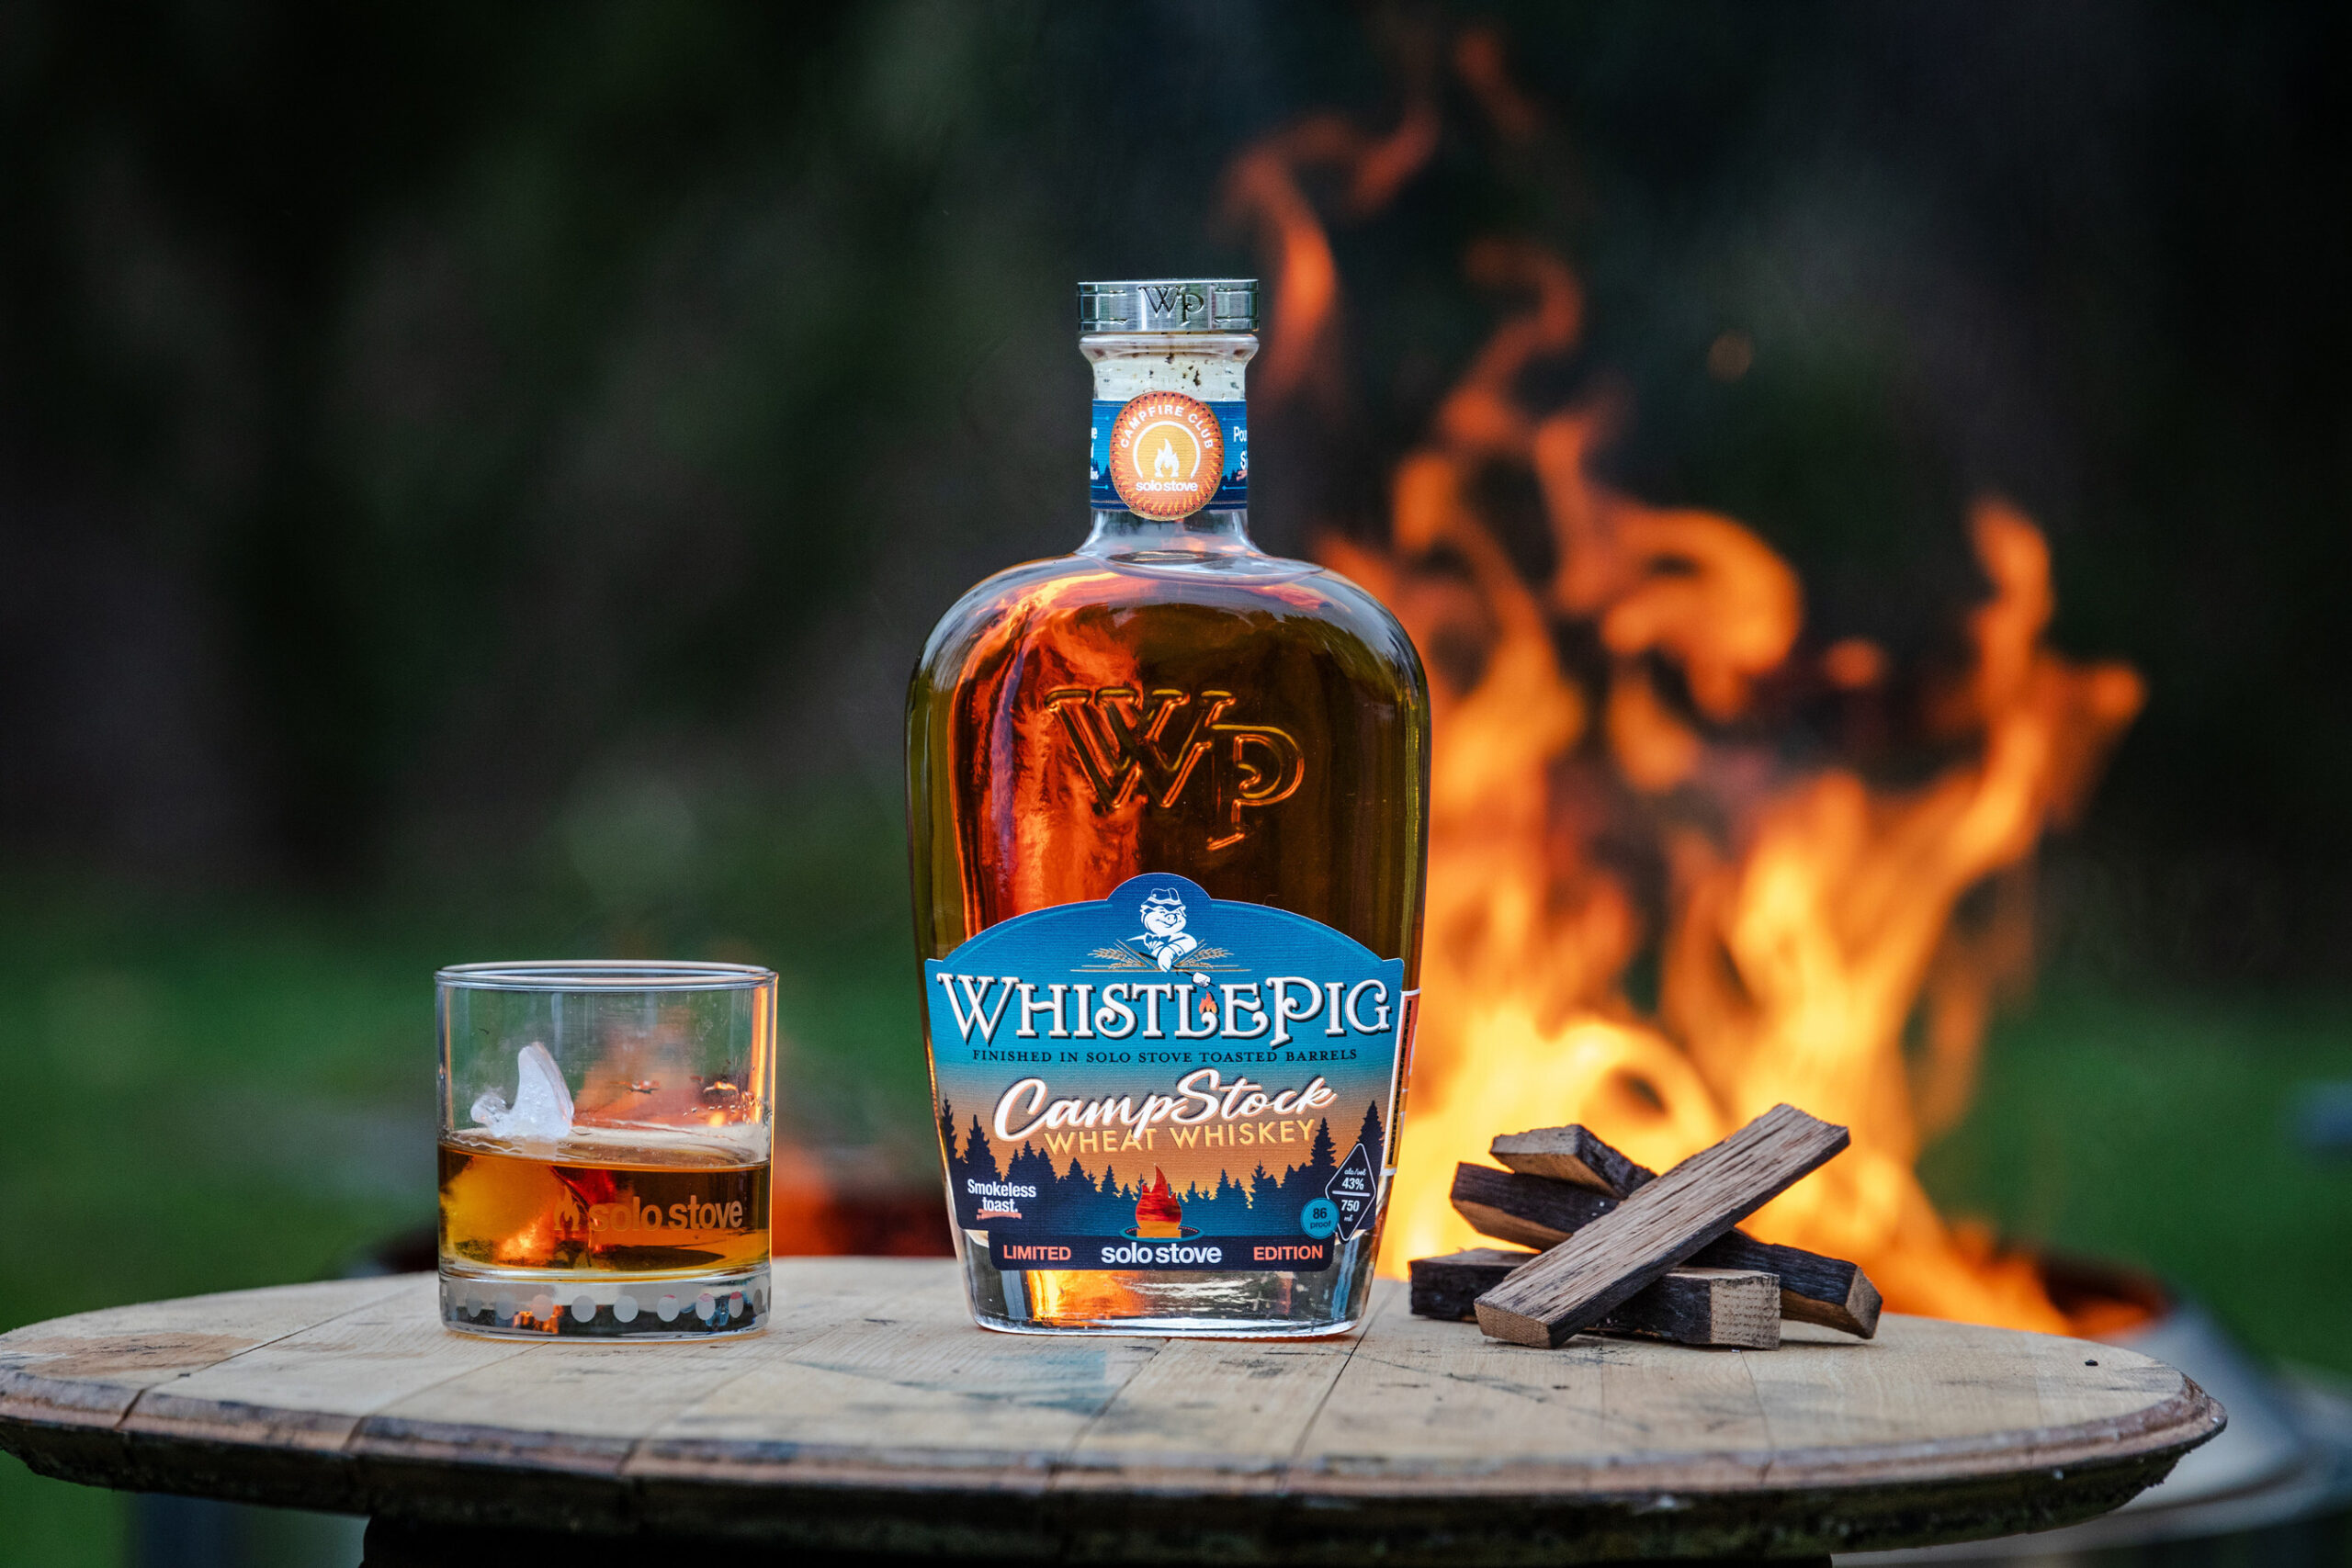 WhistlePig Creates New CampStock Wheat Whiskey with Solo Stove